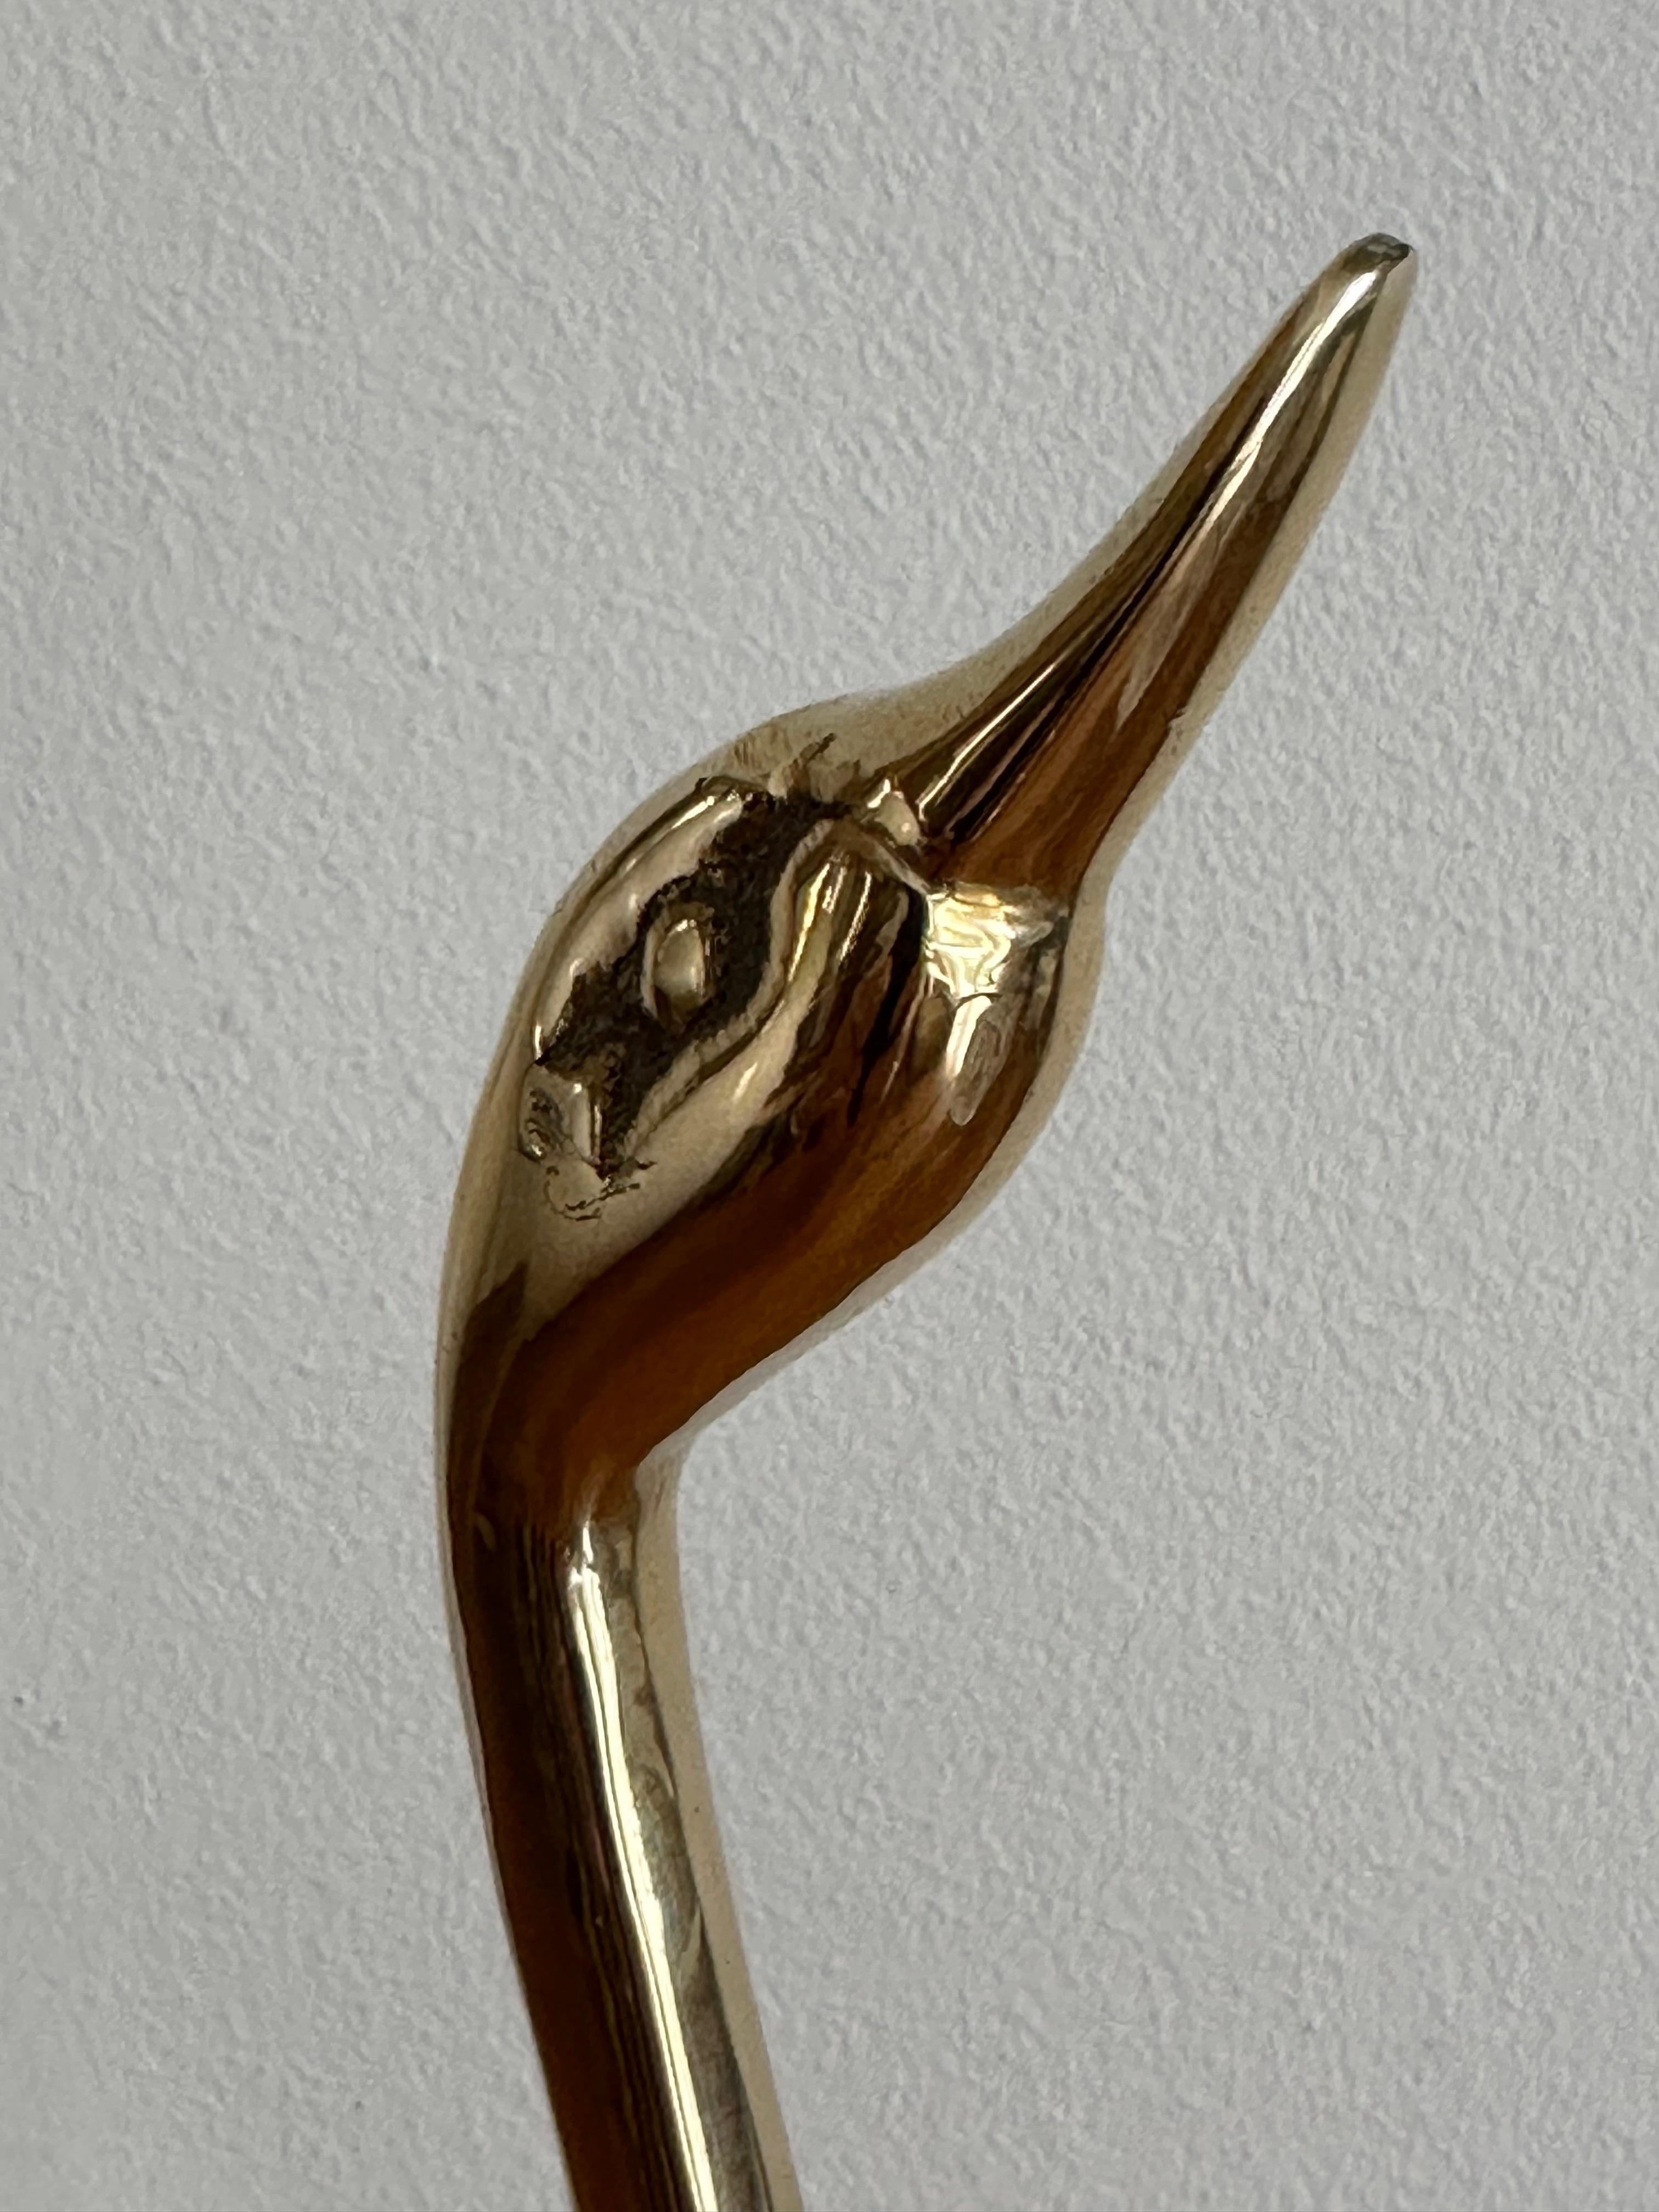 Vintage 1970s French Polished Brass Elegant Decorative Swan Paperweight 6